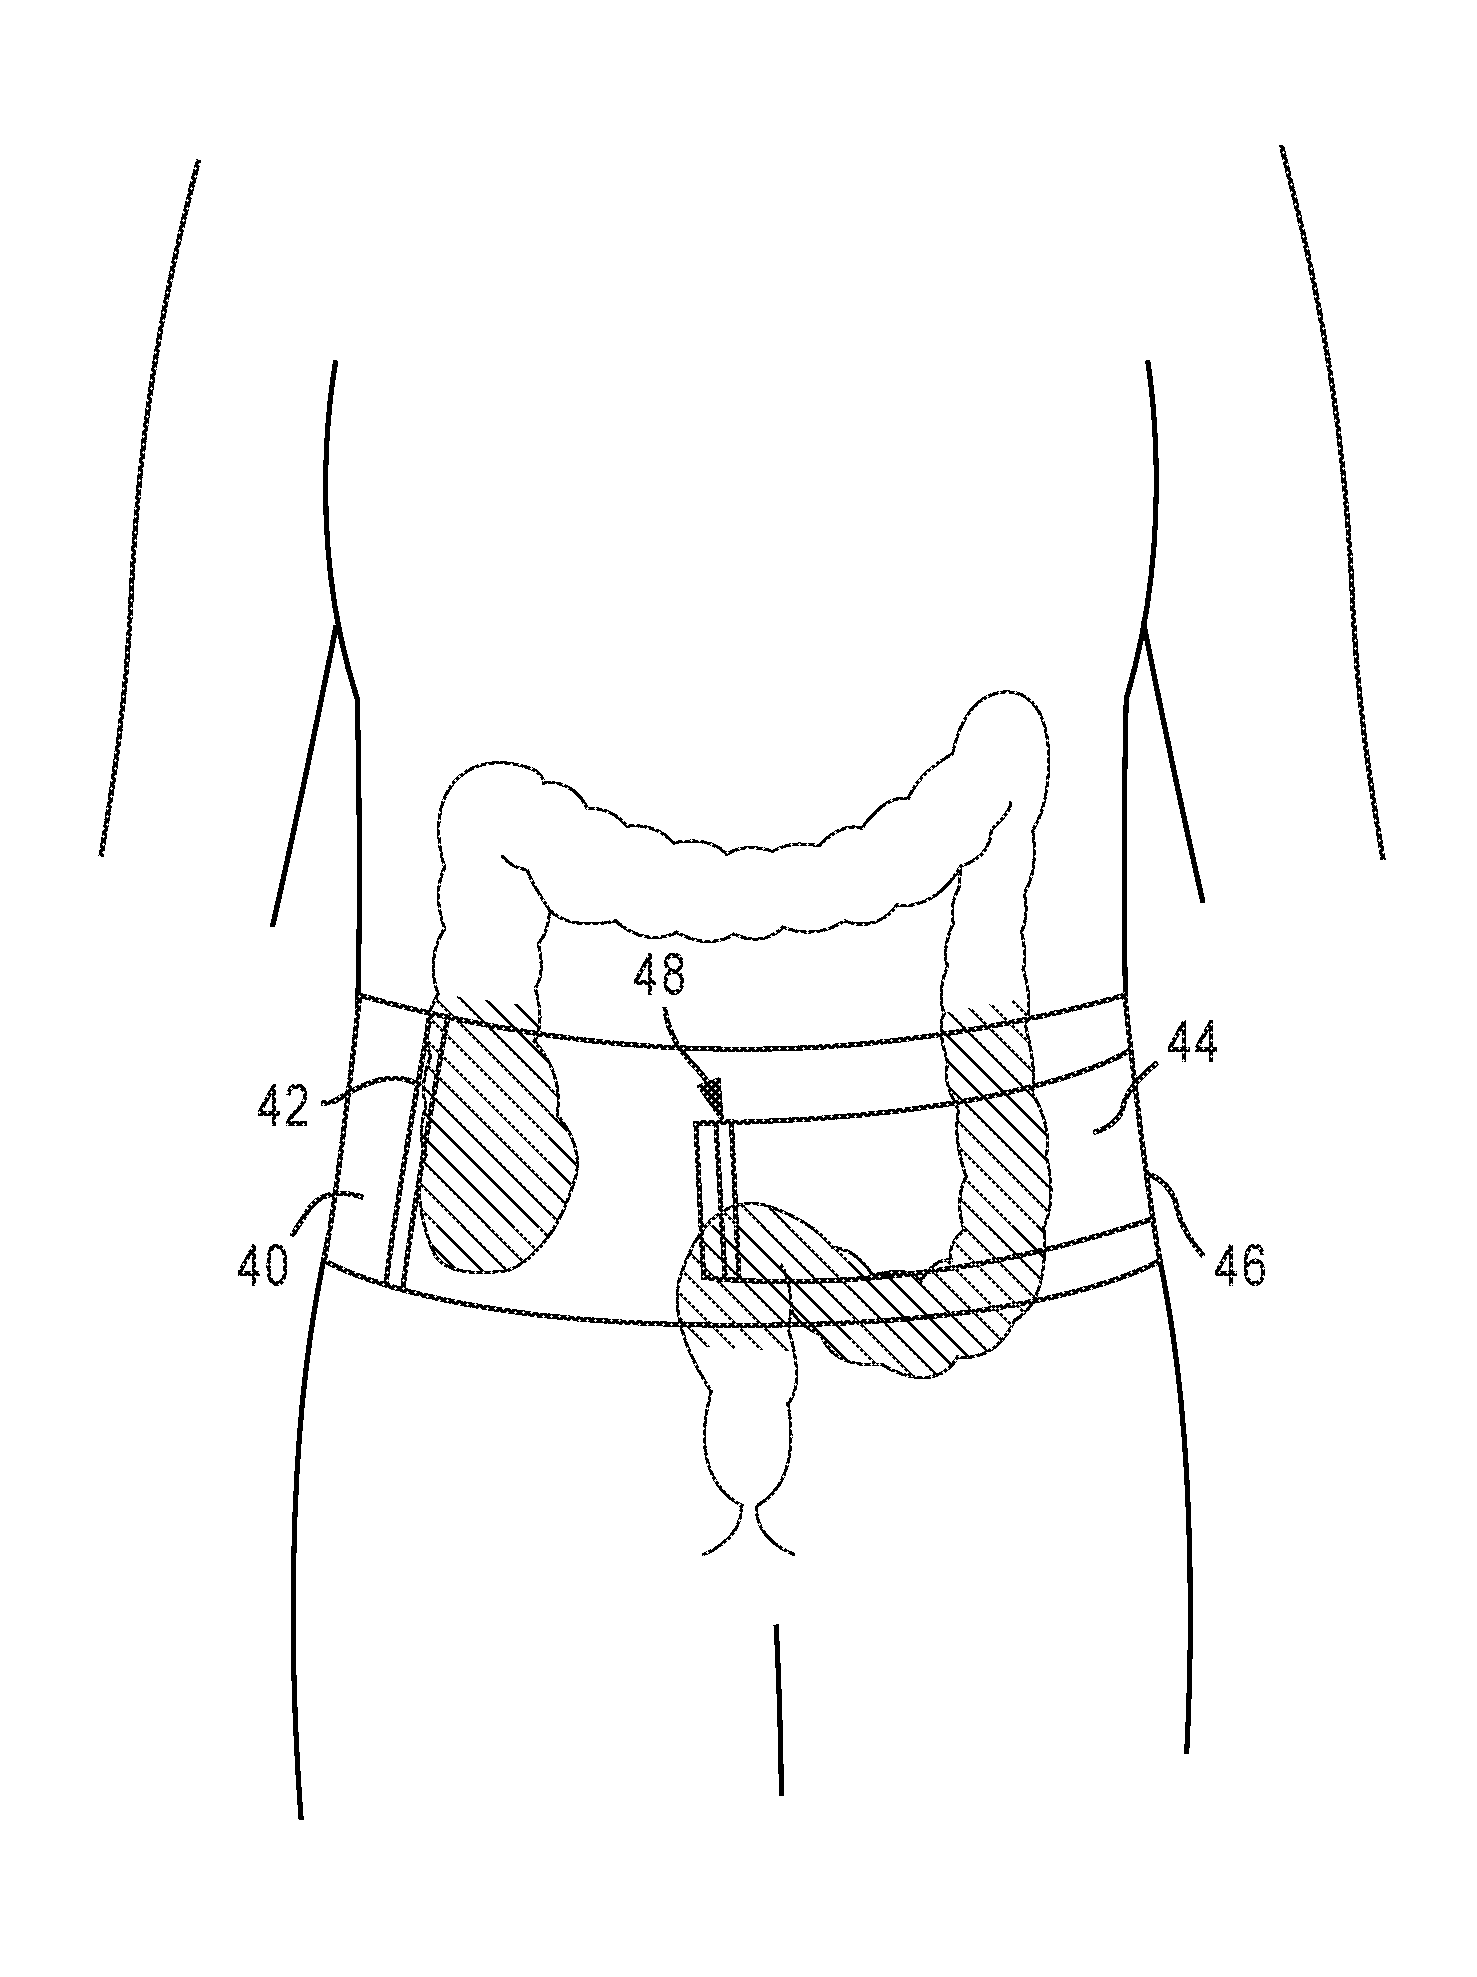 Therapeutic undergarments for the treatment of functional gastrointestinal disorders including irritable bowel syndrome